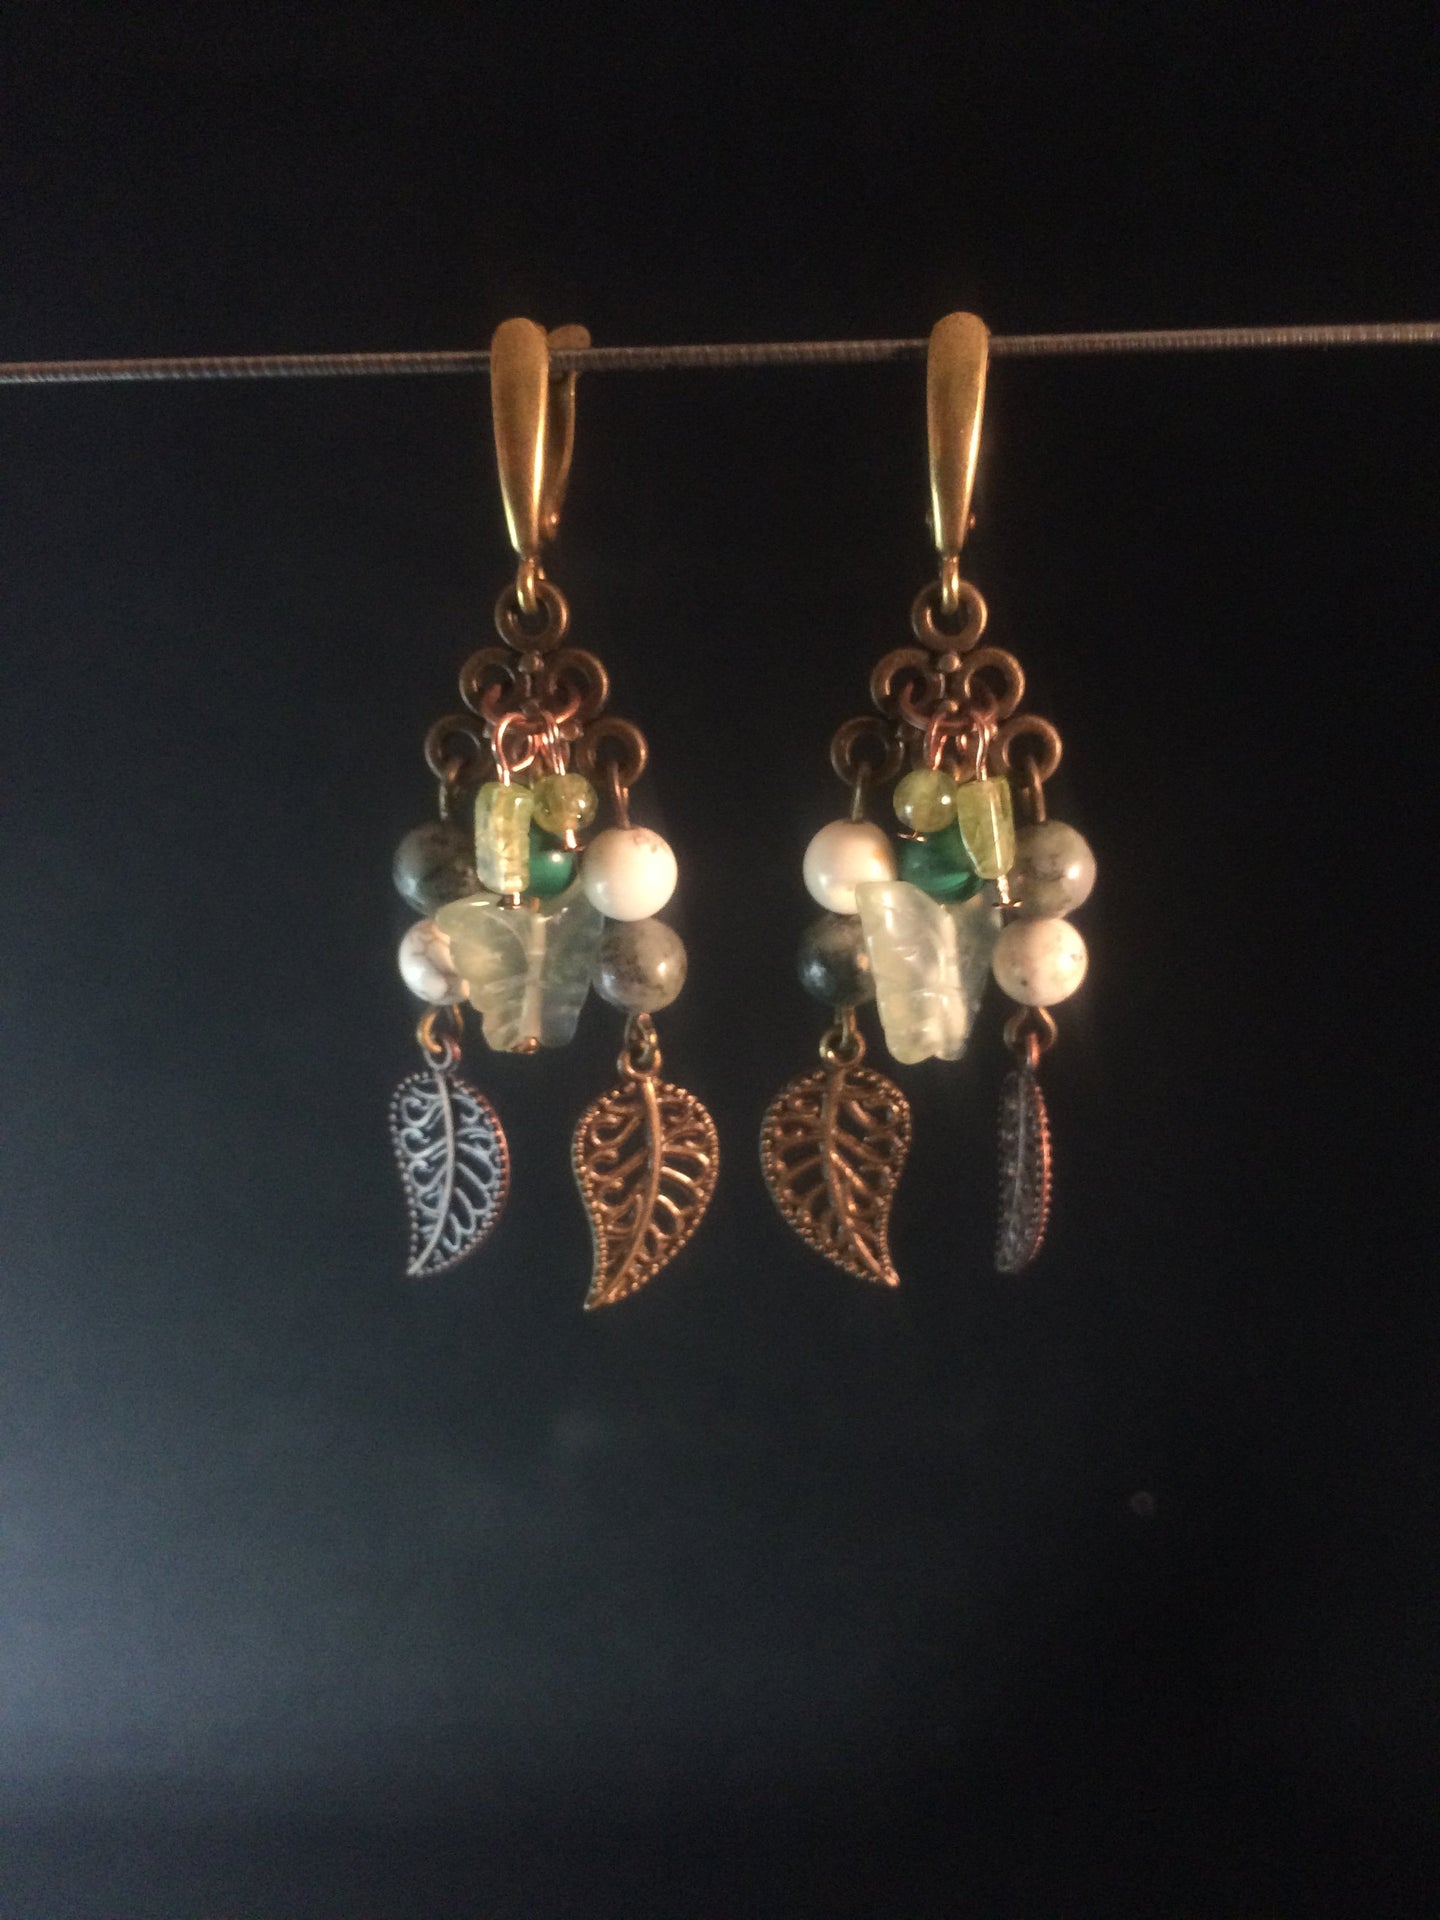 A necklace and set of leverback earrings made from glass beads, gemstone beads, and metal charms on chandelier findings. Forms a matching set with necklace 1NCK0058.